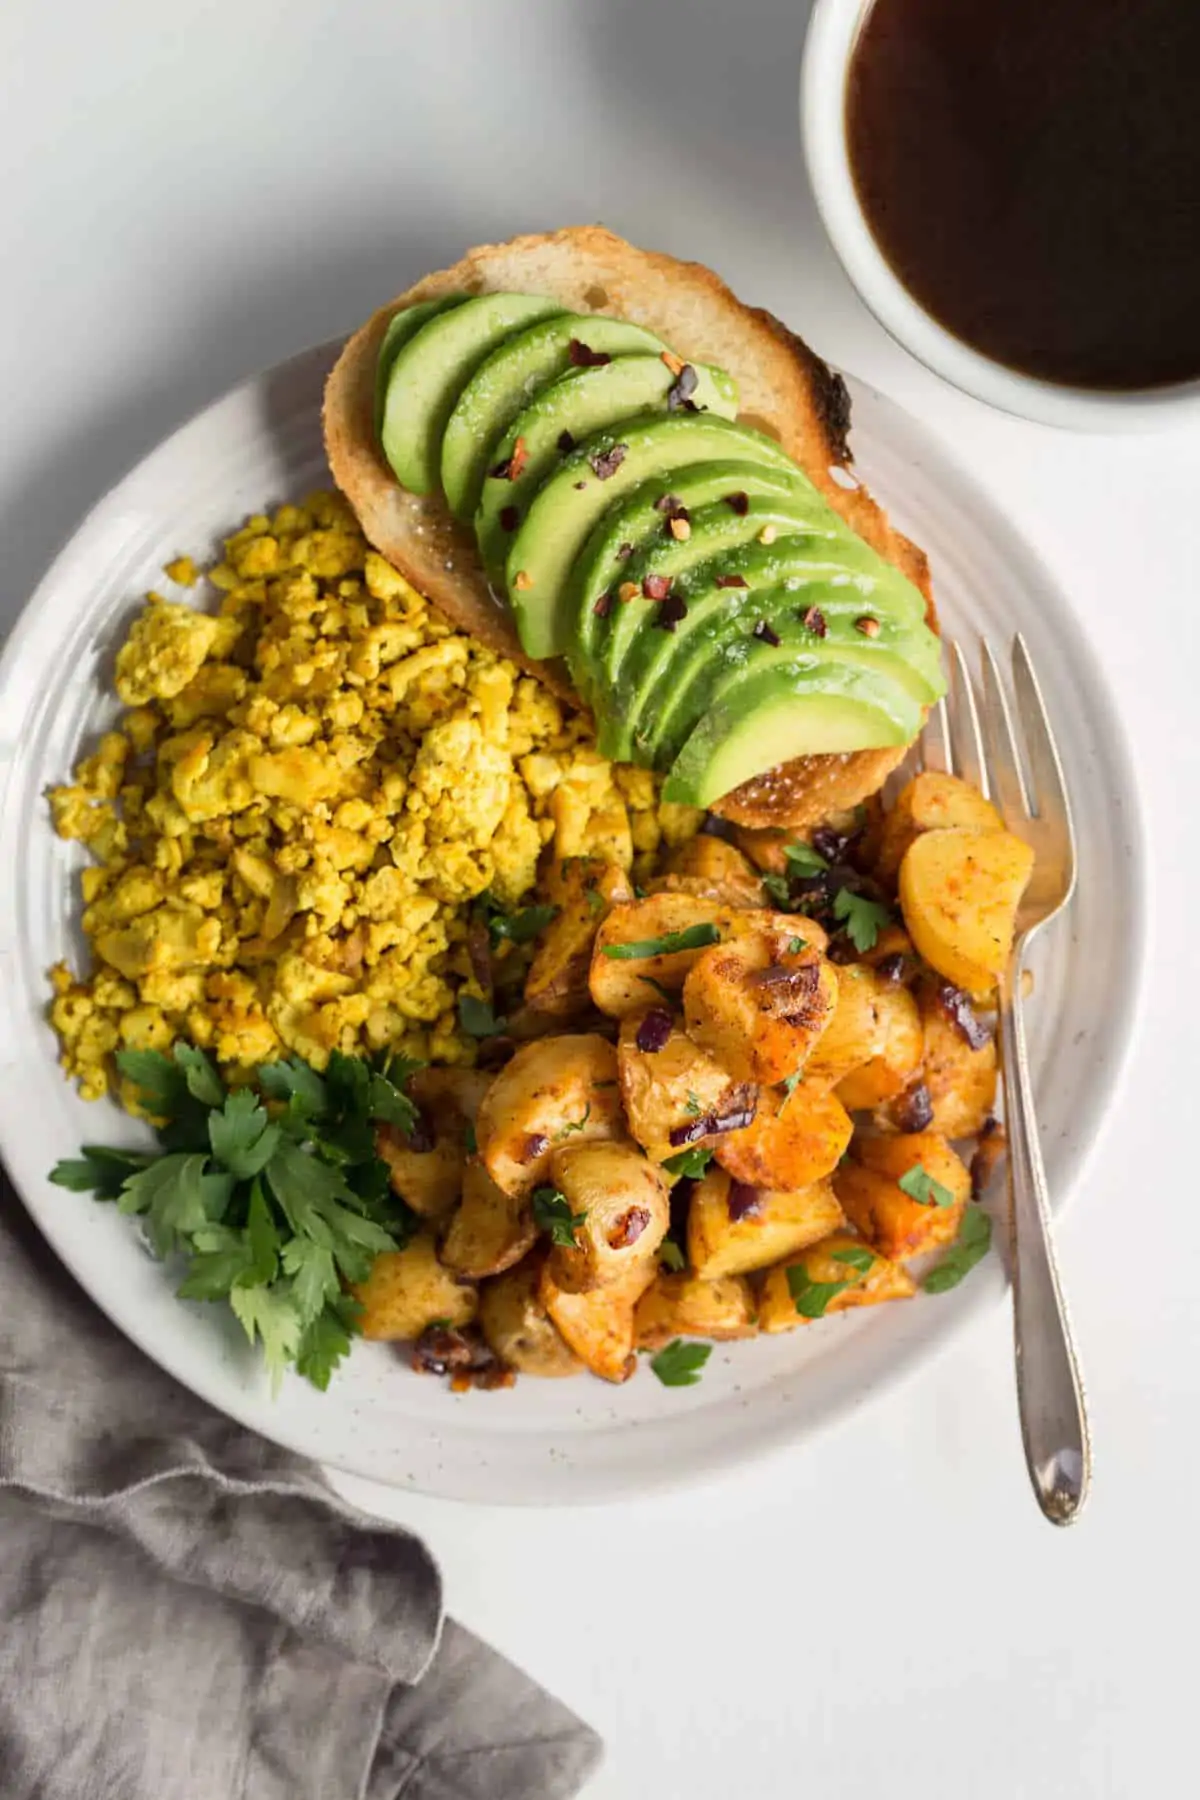 Air fryer home fries on a plate served with tofu scramble and avocado toast.